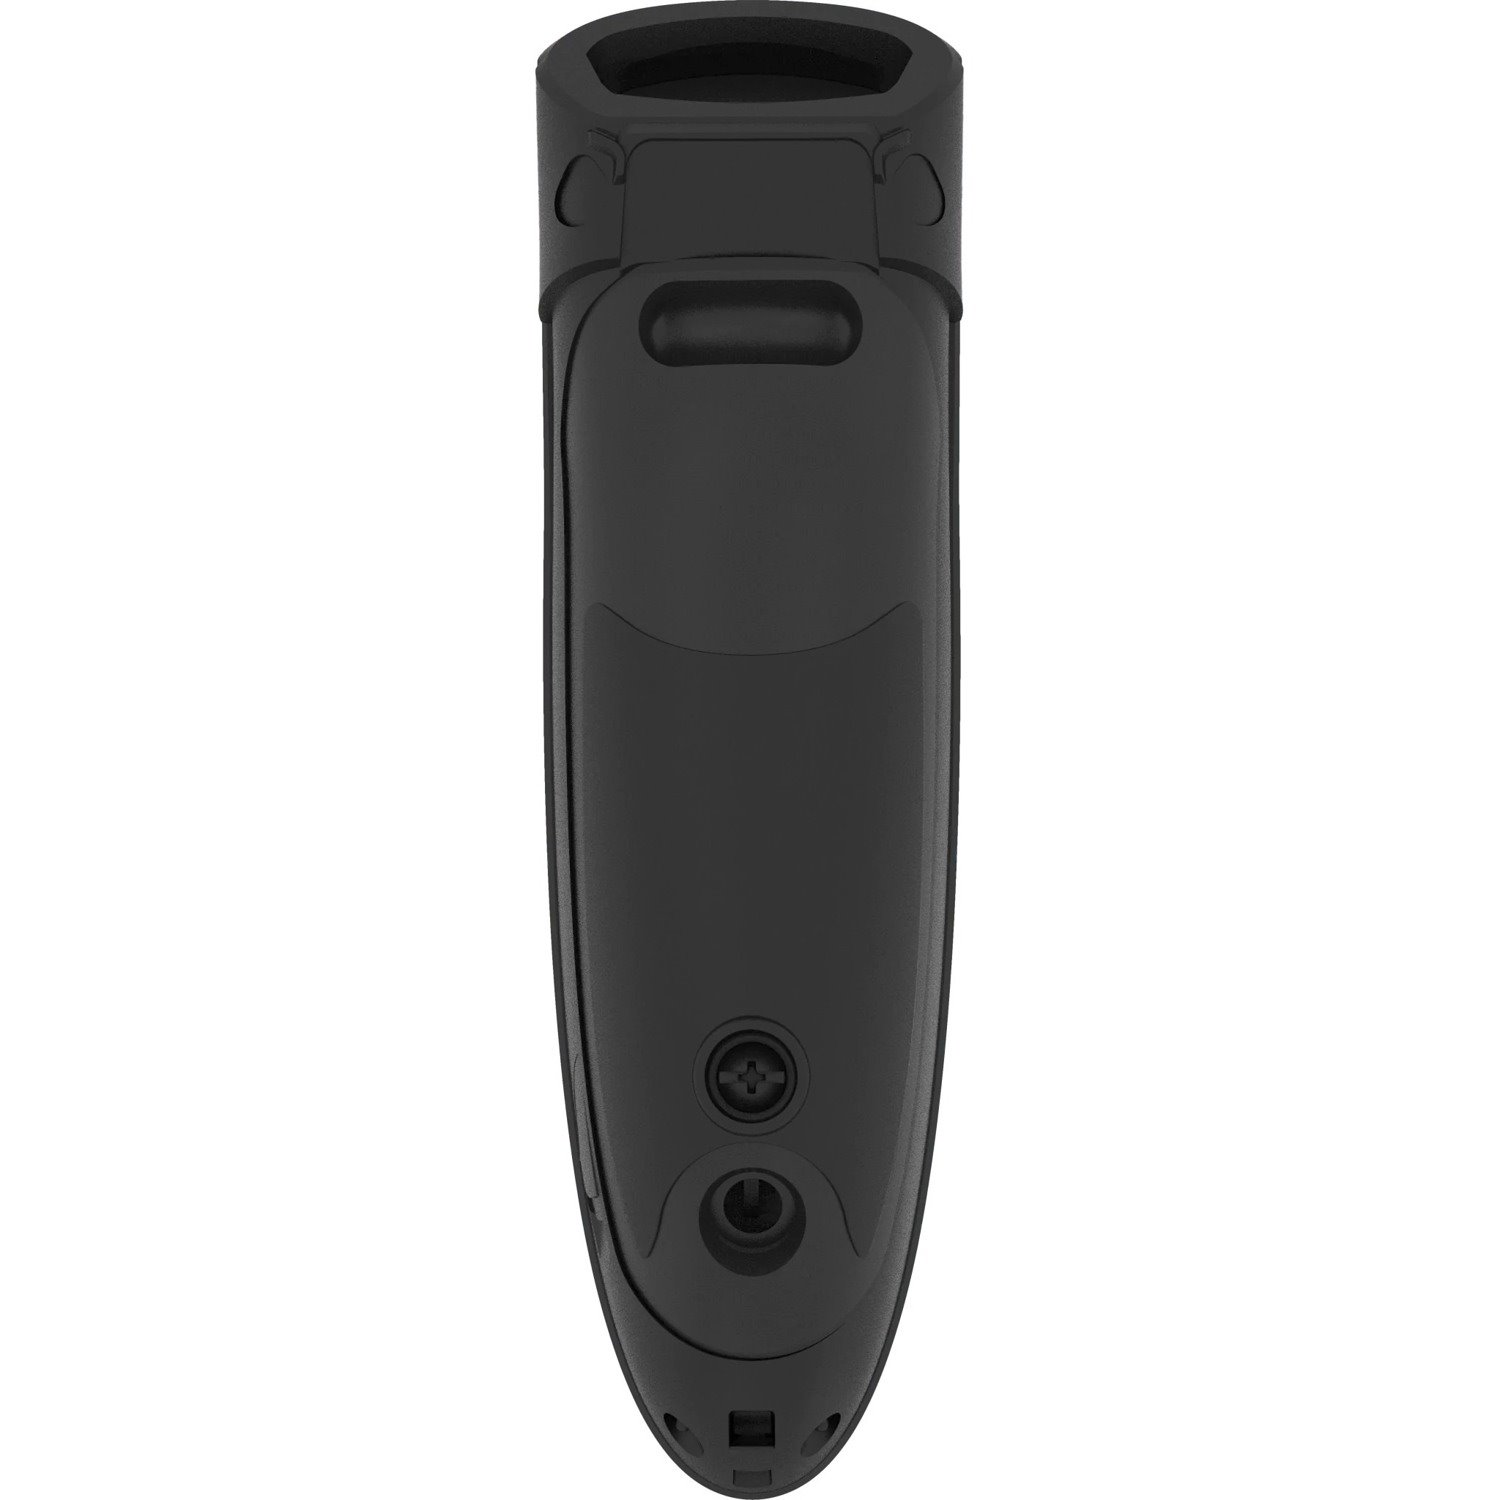 Socket Mobile DuraScan D720 Rugged Retail, Transportation, Warehouse, Field Sales/Service Handheld Barcode Scanner - Wireless Connectivity - Grey - USB Cable Included